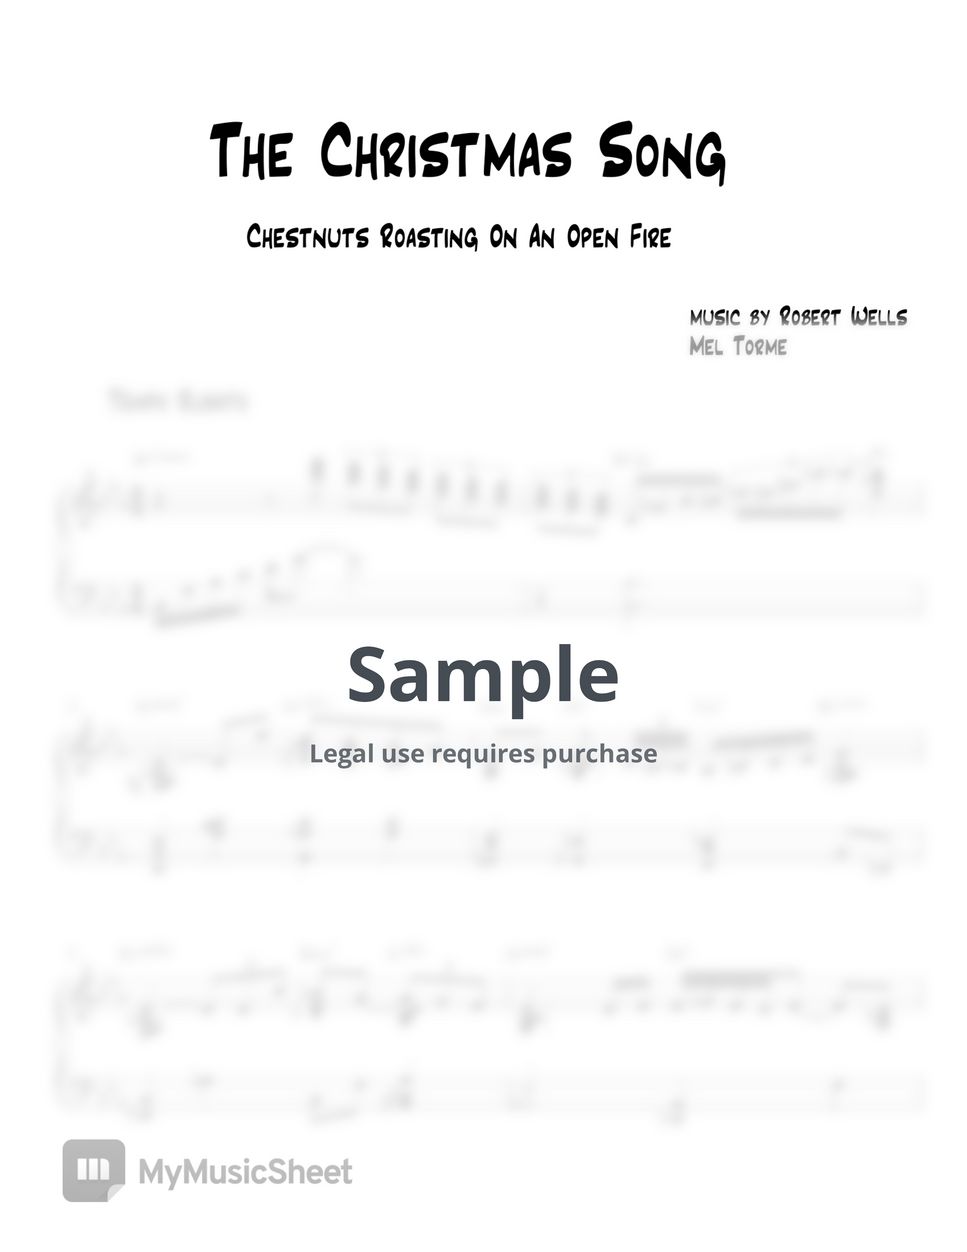 Robert Wells, Mel Torme - The Christmas Song by MIWHA